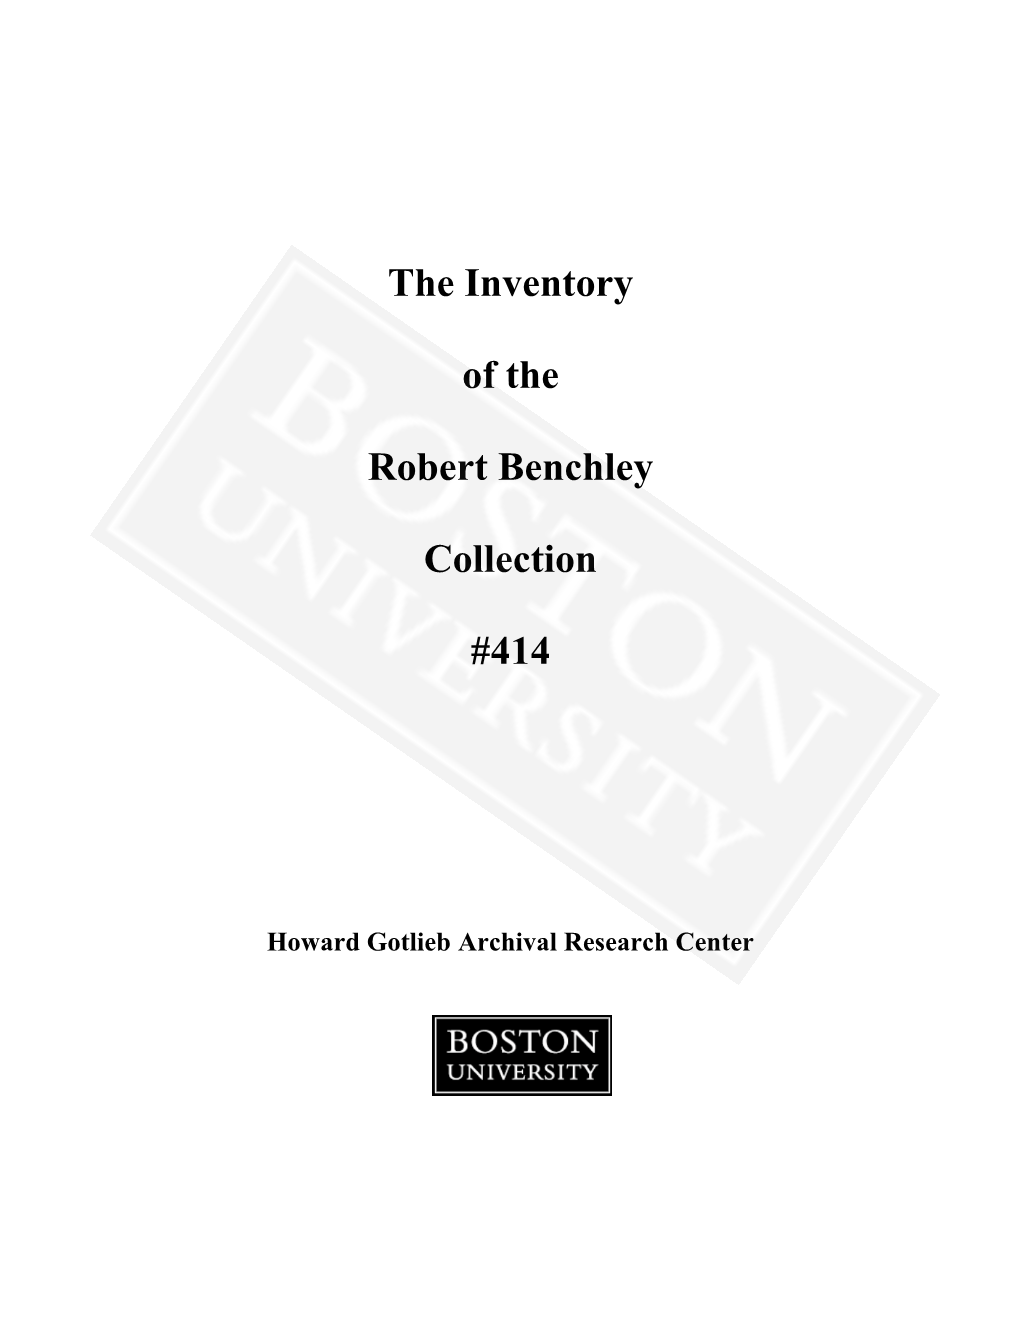 The Inventory of the Robert Benchley Collection #414